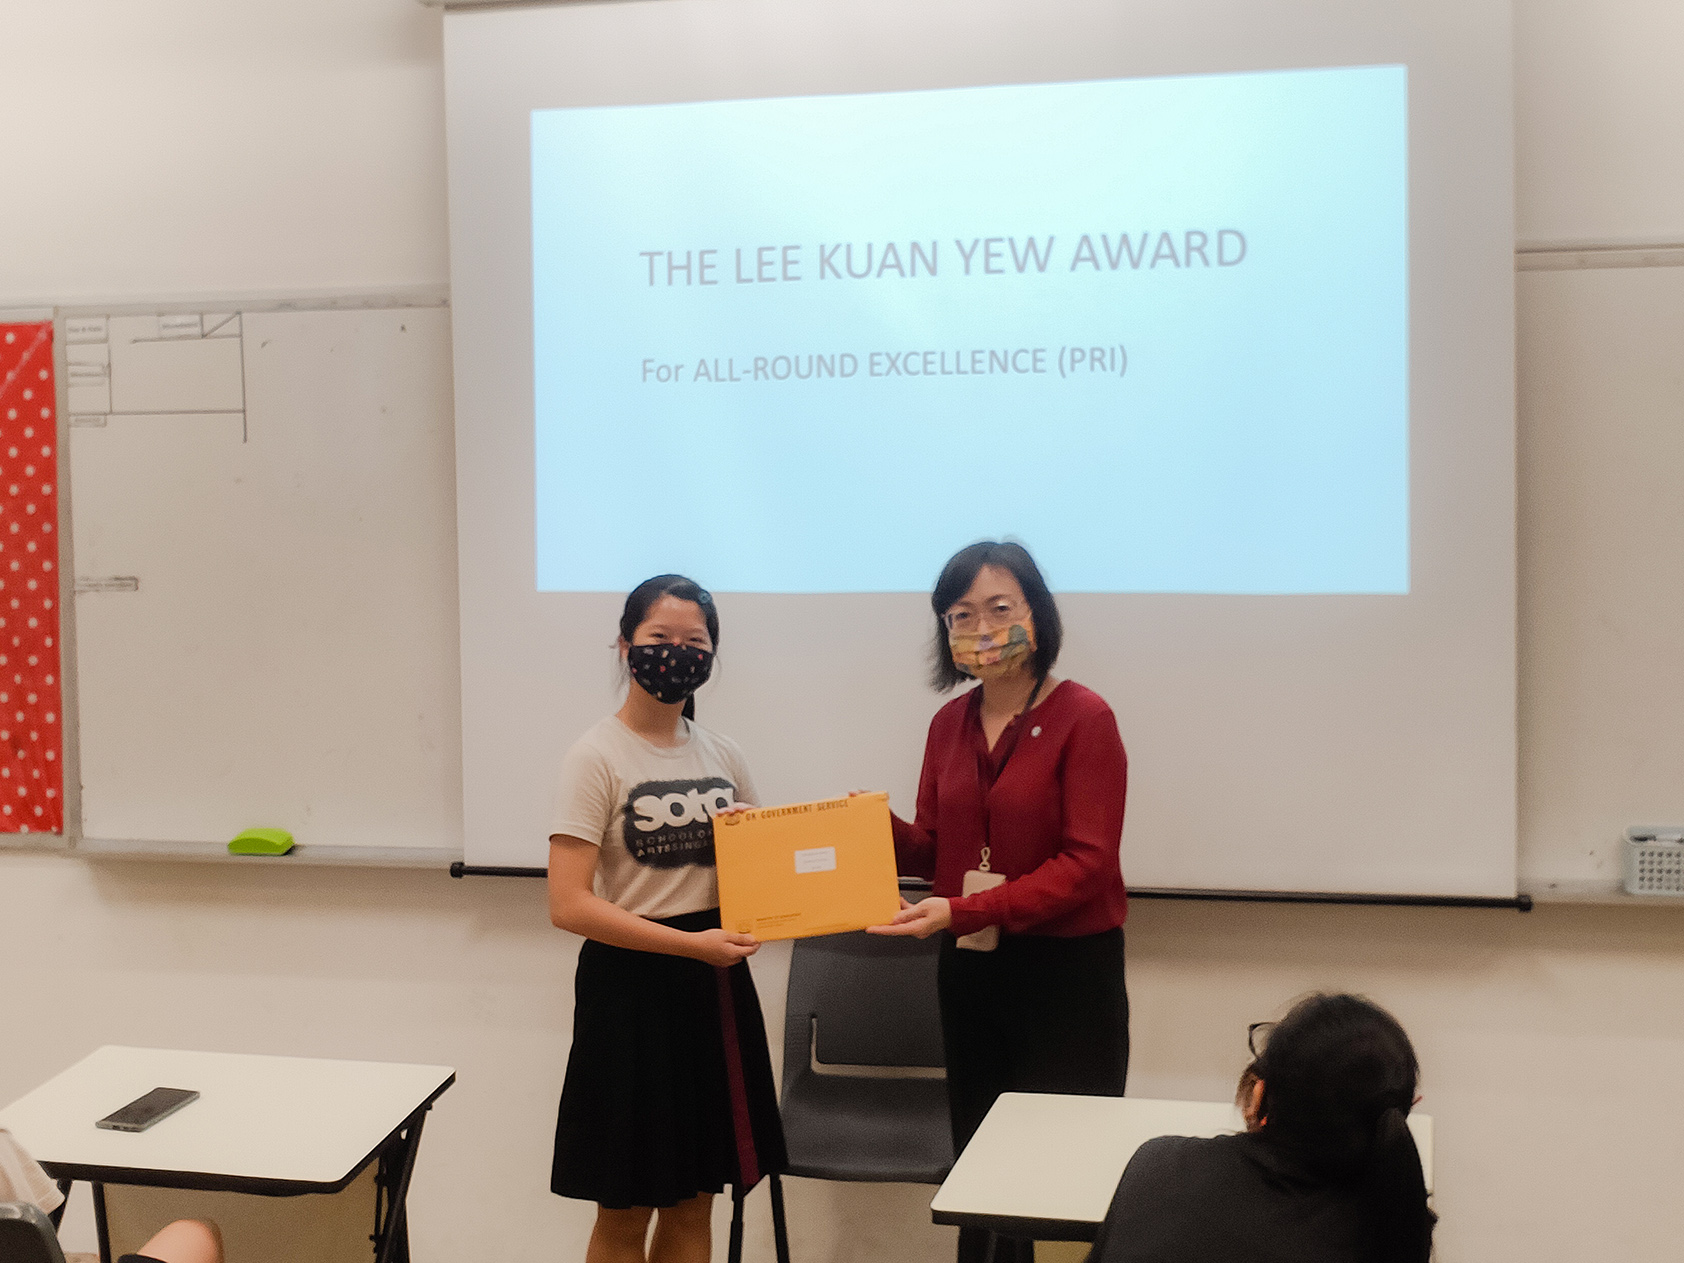 Congratulations to Janelle Tan on receiving the LKY-ARE award